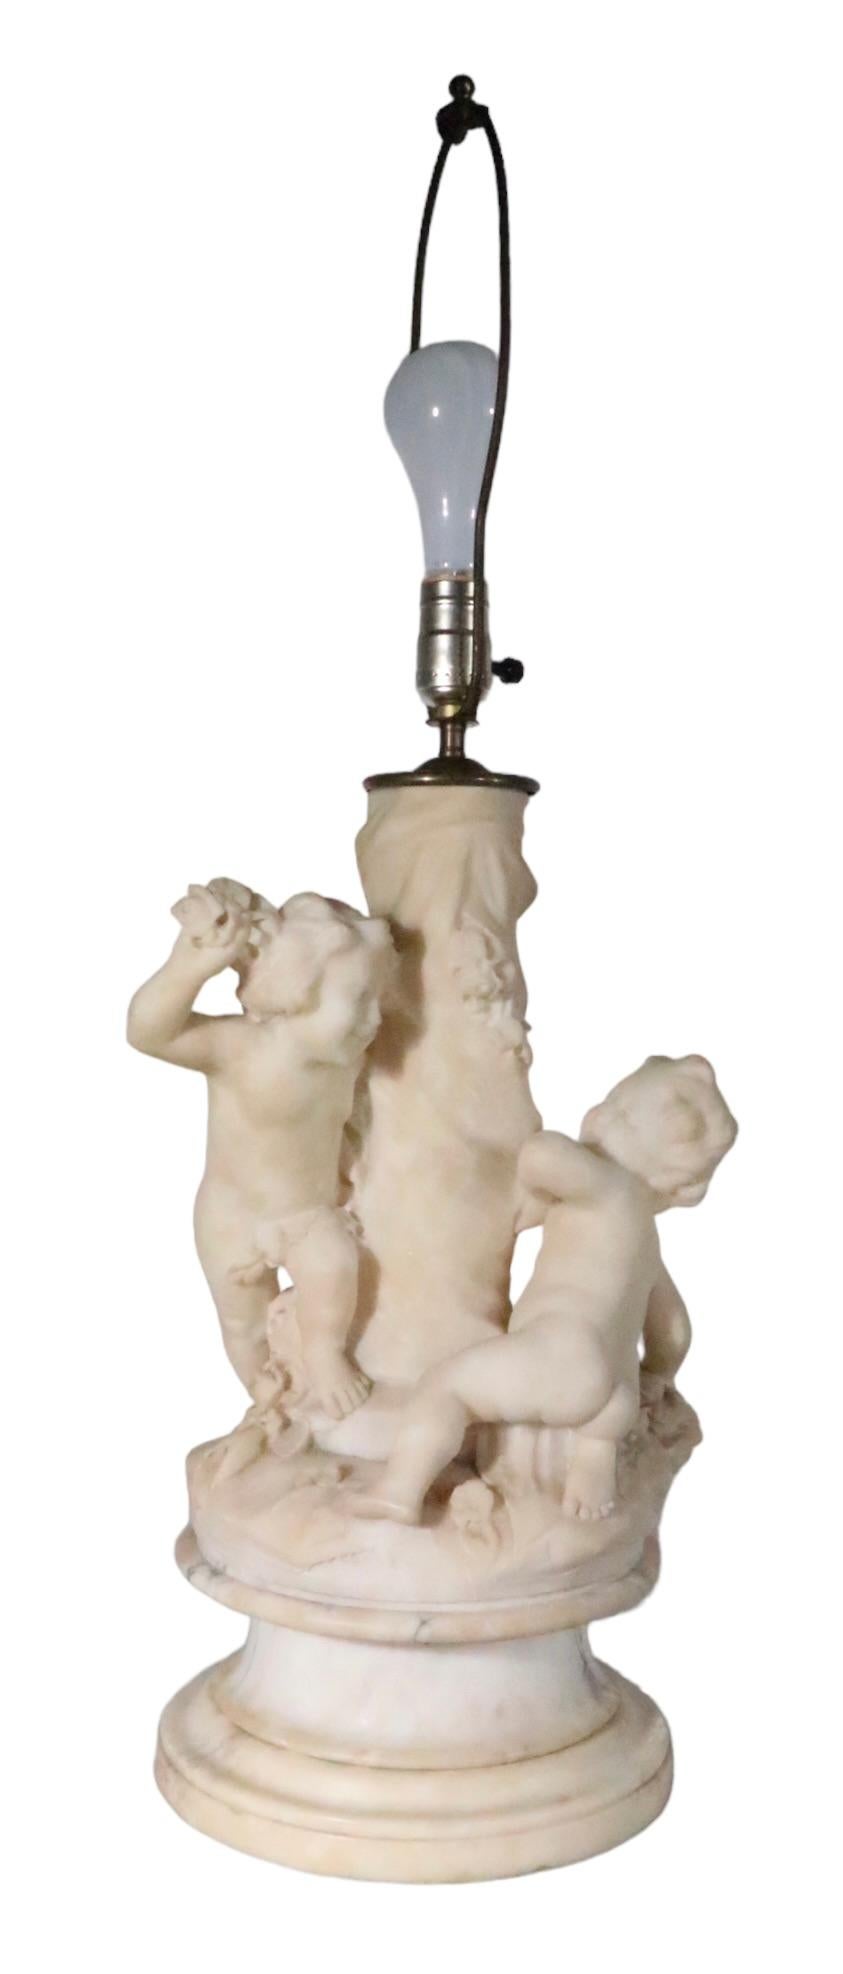 Finely carved marble table lamp having two cupid figures, playing around a center pole. The lamp is in very good original, clean and working condition, showing only light cosmetic wear, normal and consistent with age.  Classical Revival style,